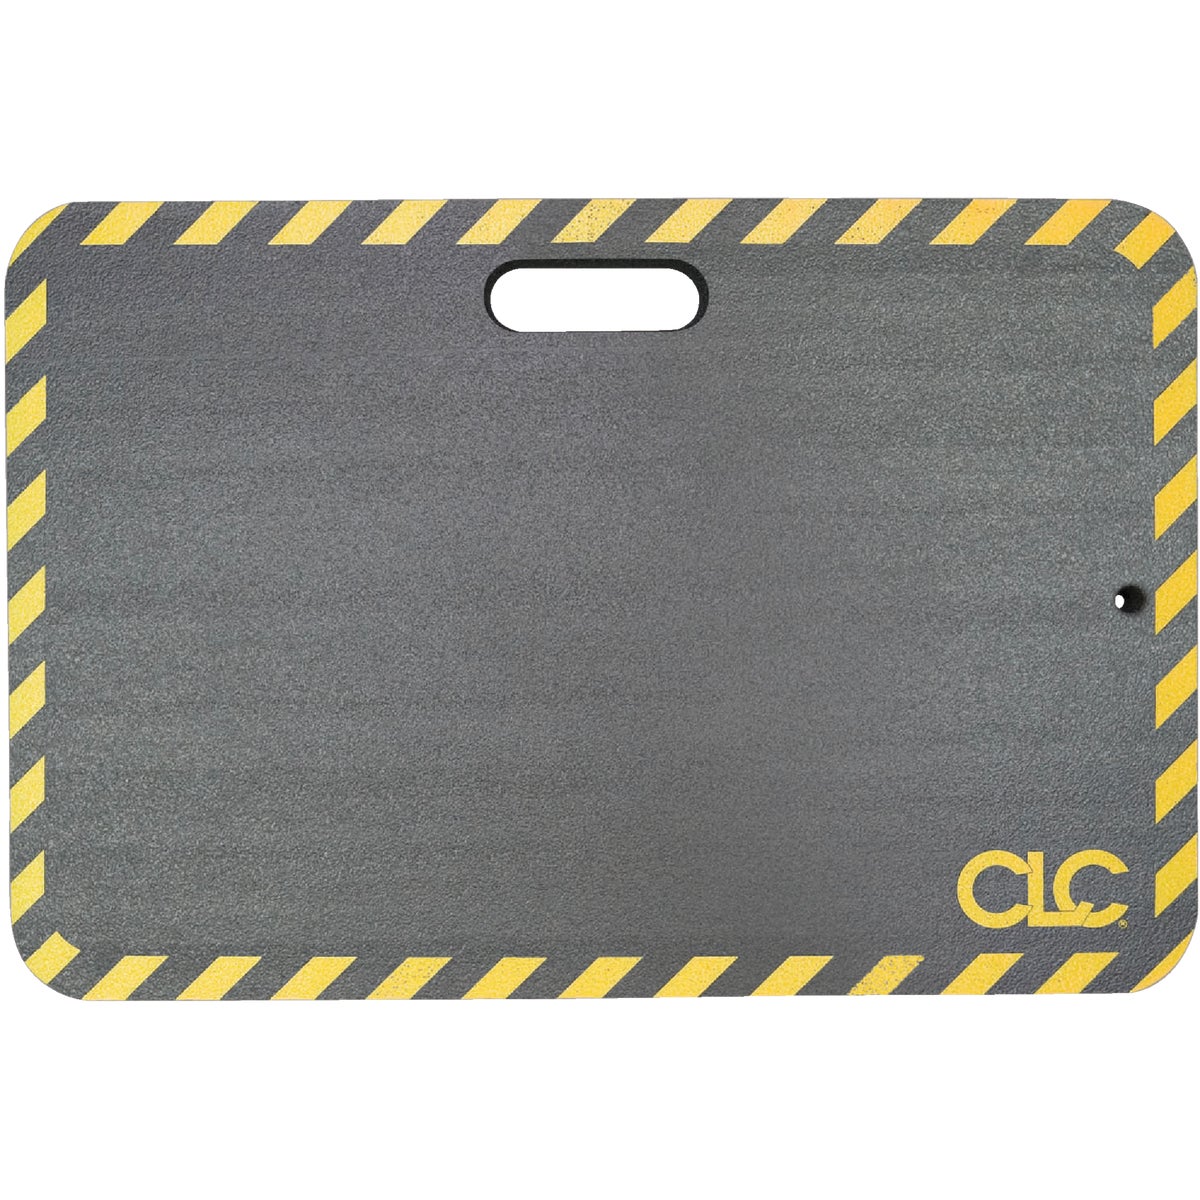 Item 300495, Kneeling mat features superior shock absorption and cushioning properties 